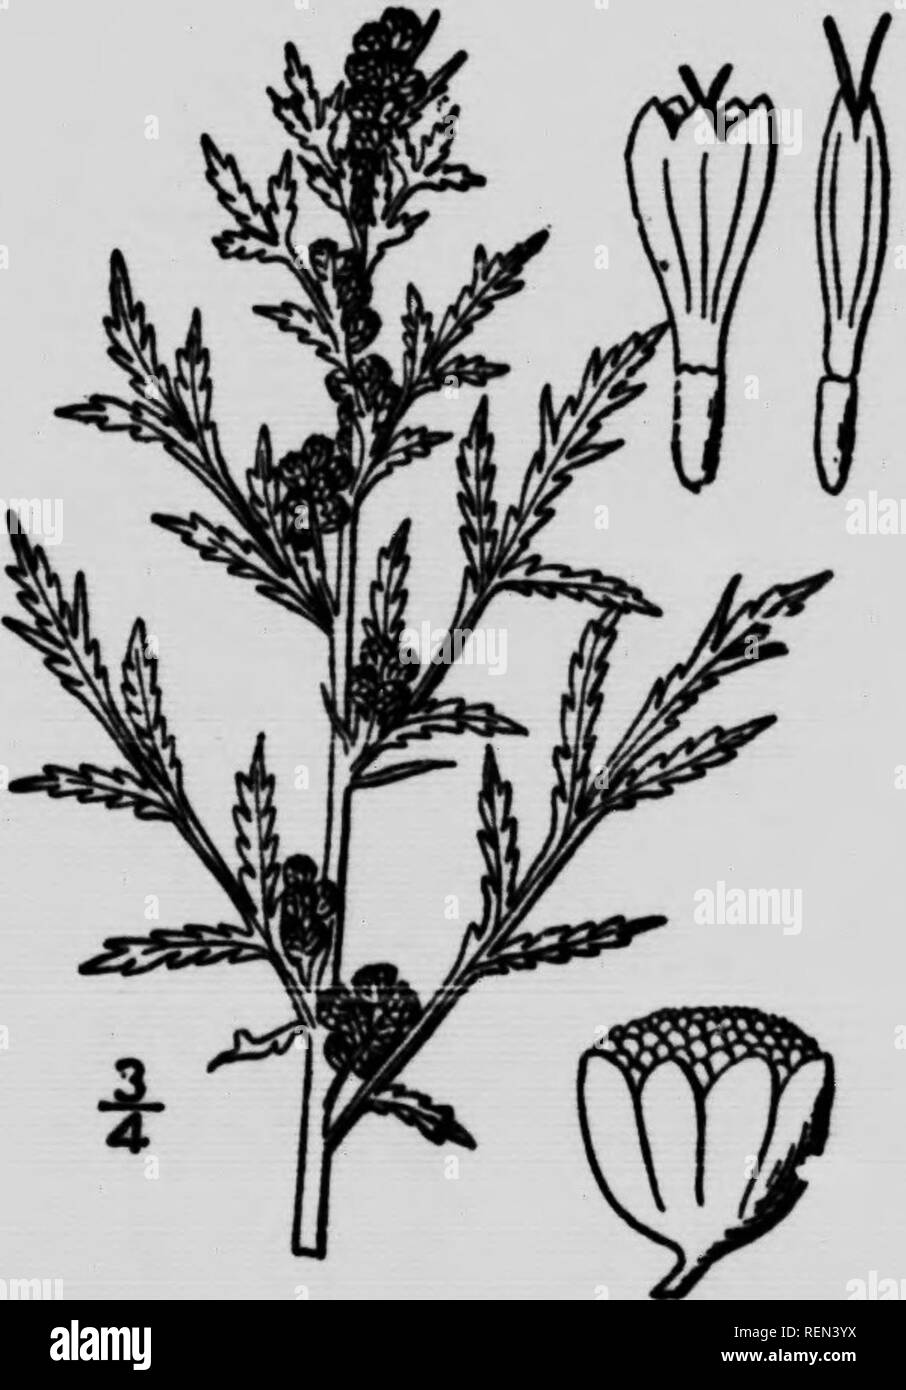 . Weeds of the farm and ranch [microform]. Sols; Weeds; Tillage; Mauvaises herbes. FALSE TAmr^ ^Artemisia biennis, WiUd.. A coarse, rank growing, strong- scented native plant of biennial habit, and most abundant in low damp portions of the fields. Its leaves are dark green and finely divided. The flowers are incon- apicuous and only appear during the second year of growth. In crops sown on stubble the stout stalks interfere seriously with the work of the binder. Fall or spring ploughing or careful disc- ing will destroy it if you do not wish to summer-fallow. ». Please note that these images a Stock Photo